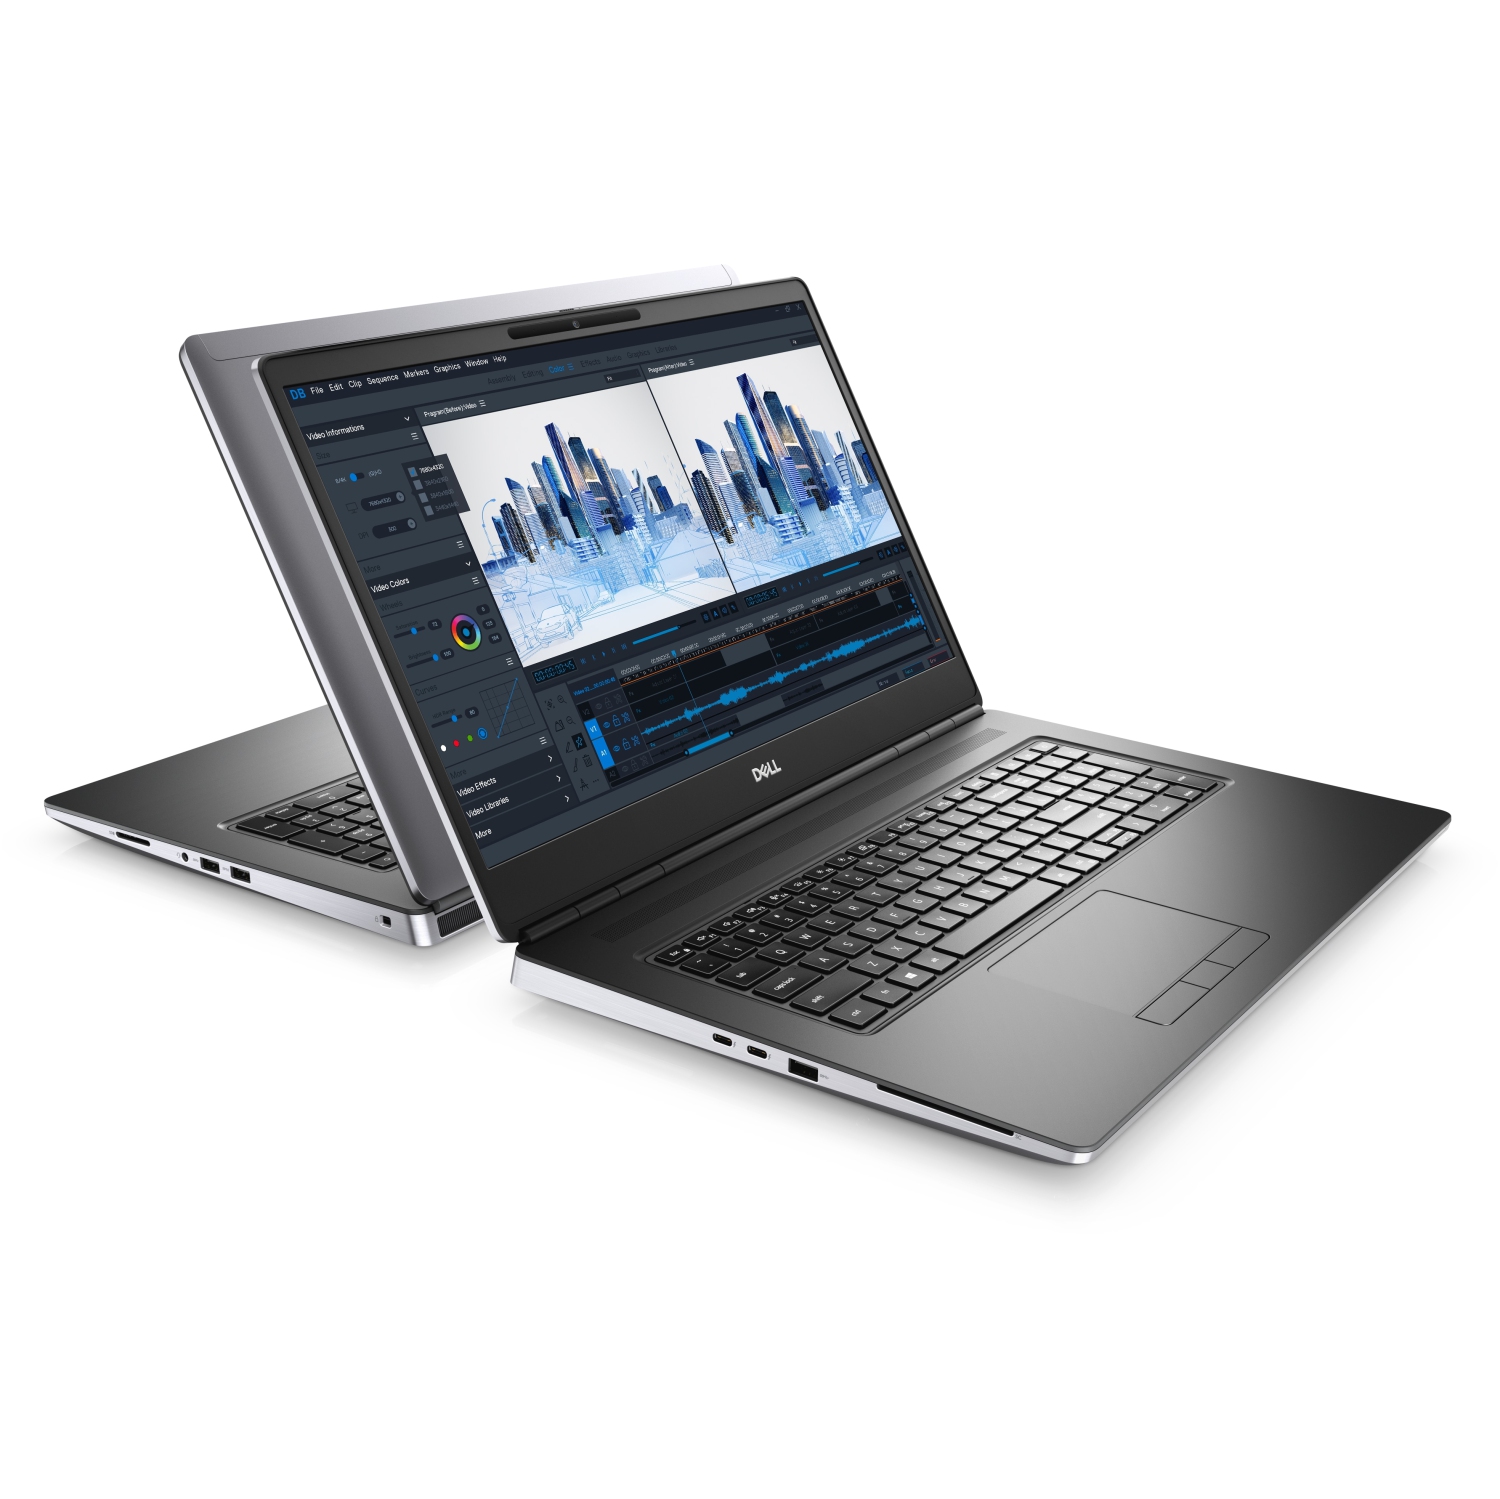 Refurbished (Excellent) - Dell Precision 7000 7760 Workstation Laptop (2021), 17.3" 4K, Core i7, 2TB SSD, 64GB RAM, RTX A5000, 4.6 GHz, 11th Gen CPU Certified Refurbished